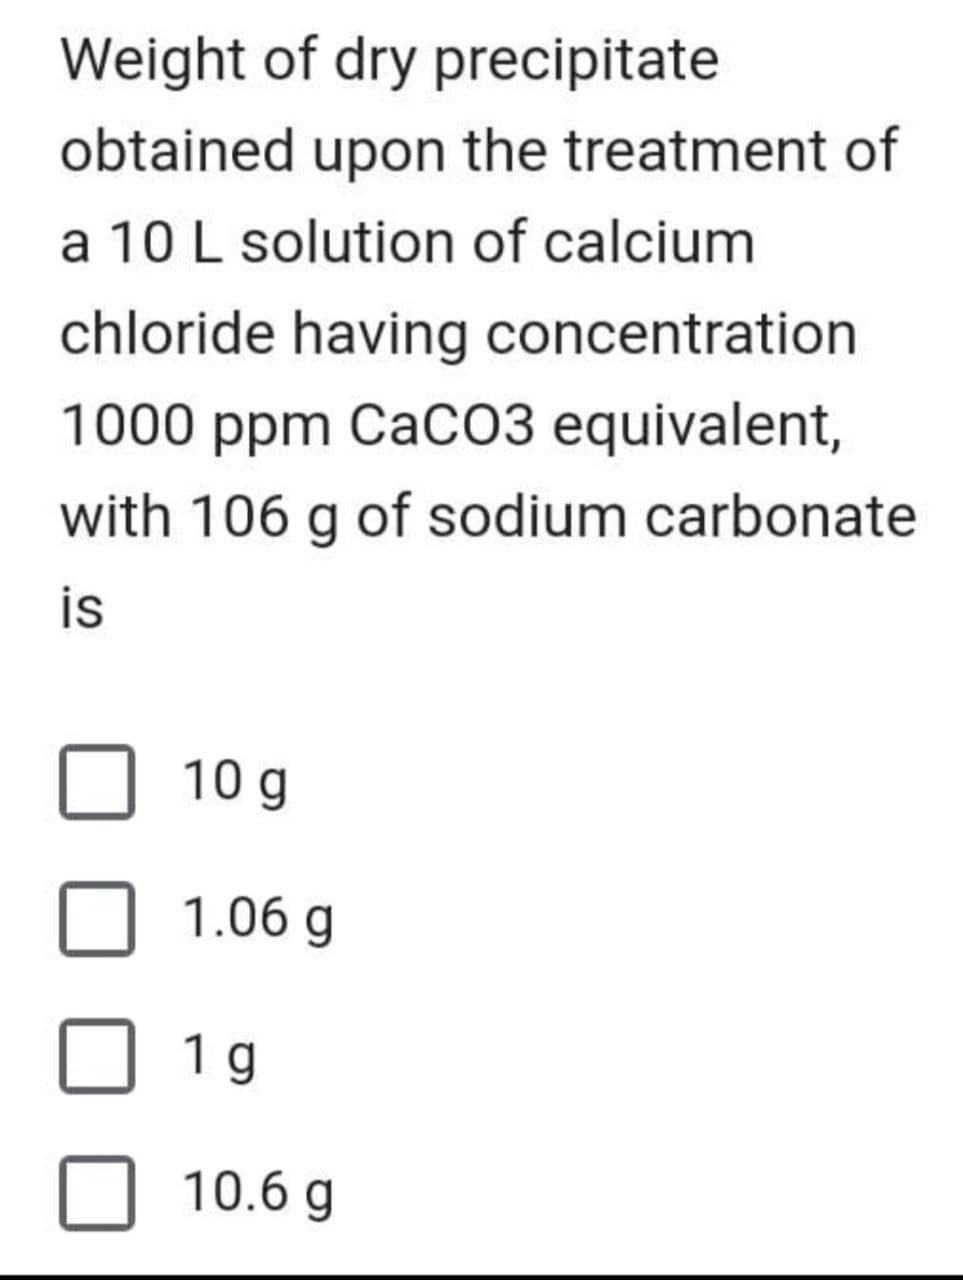 Weight of dry precipitate
obtained upon the treatment of
a 10 L solution of calcium
chloride having concentration
1000 ppm CaCO3 equivalent,
with 106 g of sodium carbonate
is
10 g
1.06 g
1 g
10.6 g